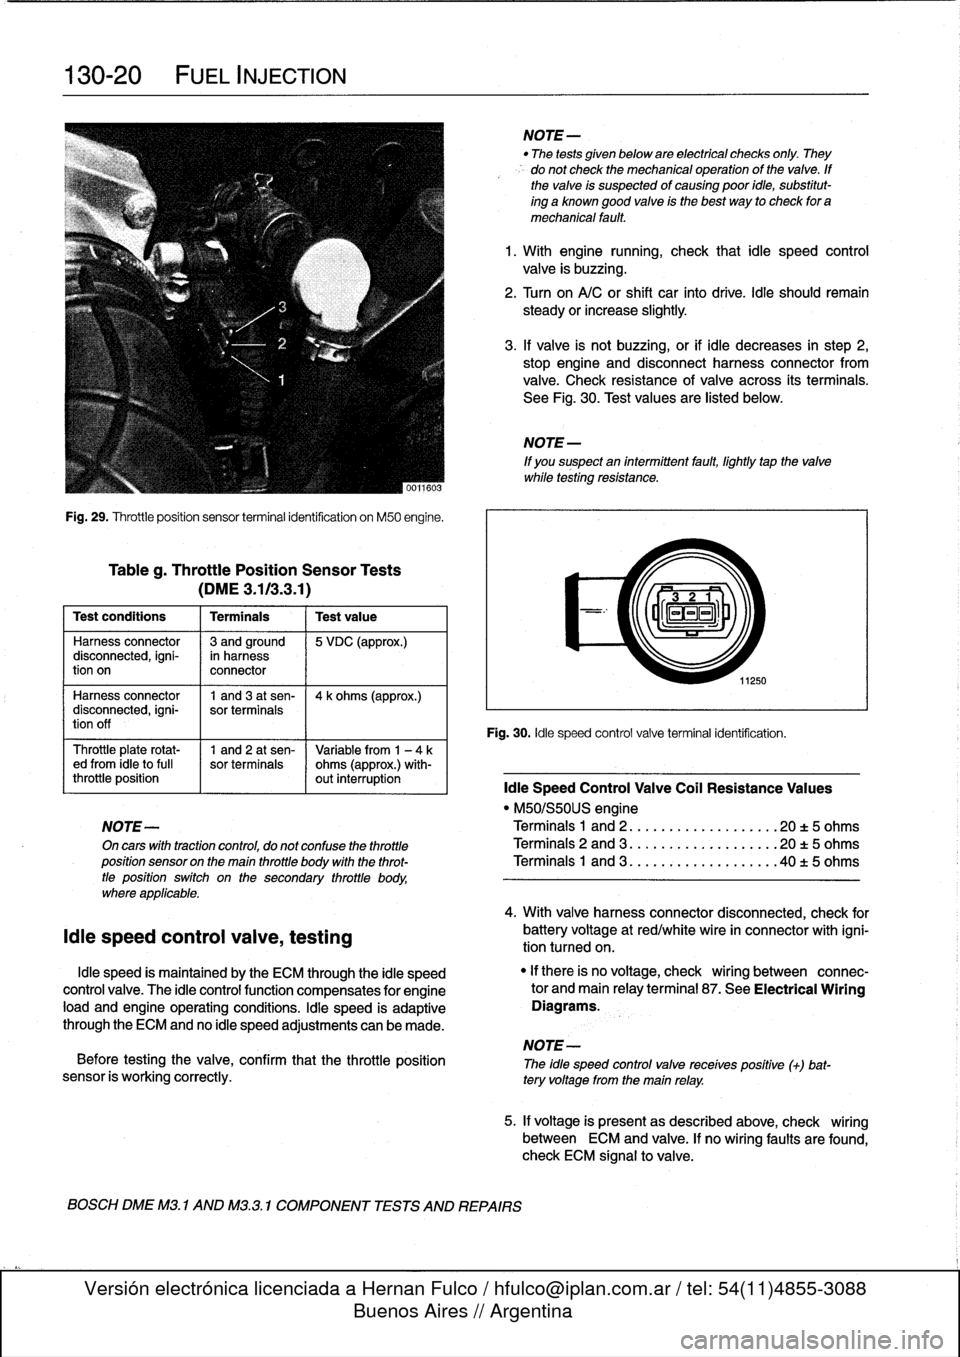 BMW 328i 1995 E36 Workshop Manual 
130-20

	

FUEL
INJECTION

Fig
.
29
.
Throttleposition
sensor
terminal
identification
on
M50
engine
.

Tableg
.
Throttle
Position
Sensor
Tests

(DME3
.113
.3
.1)

Test
conditions

	

I
Terminals

	

